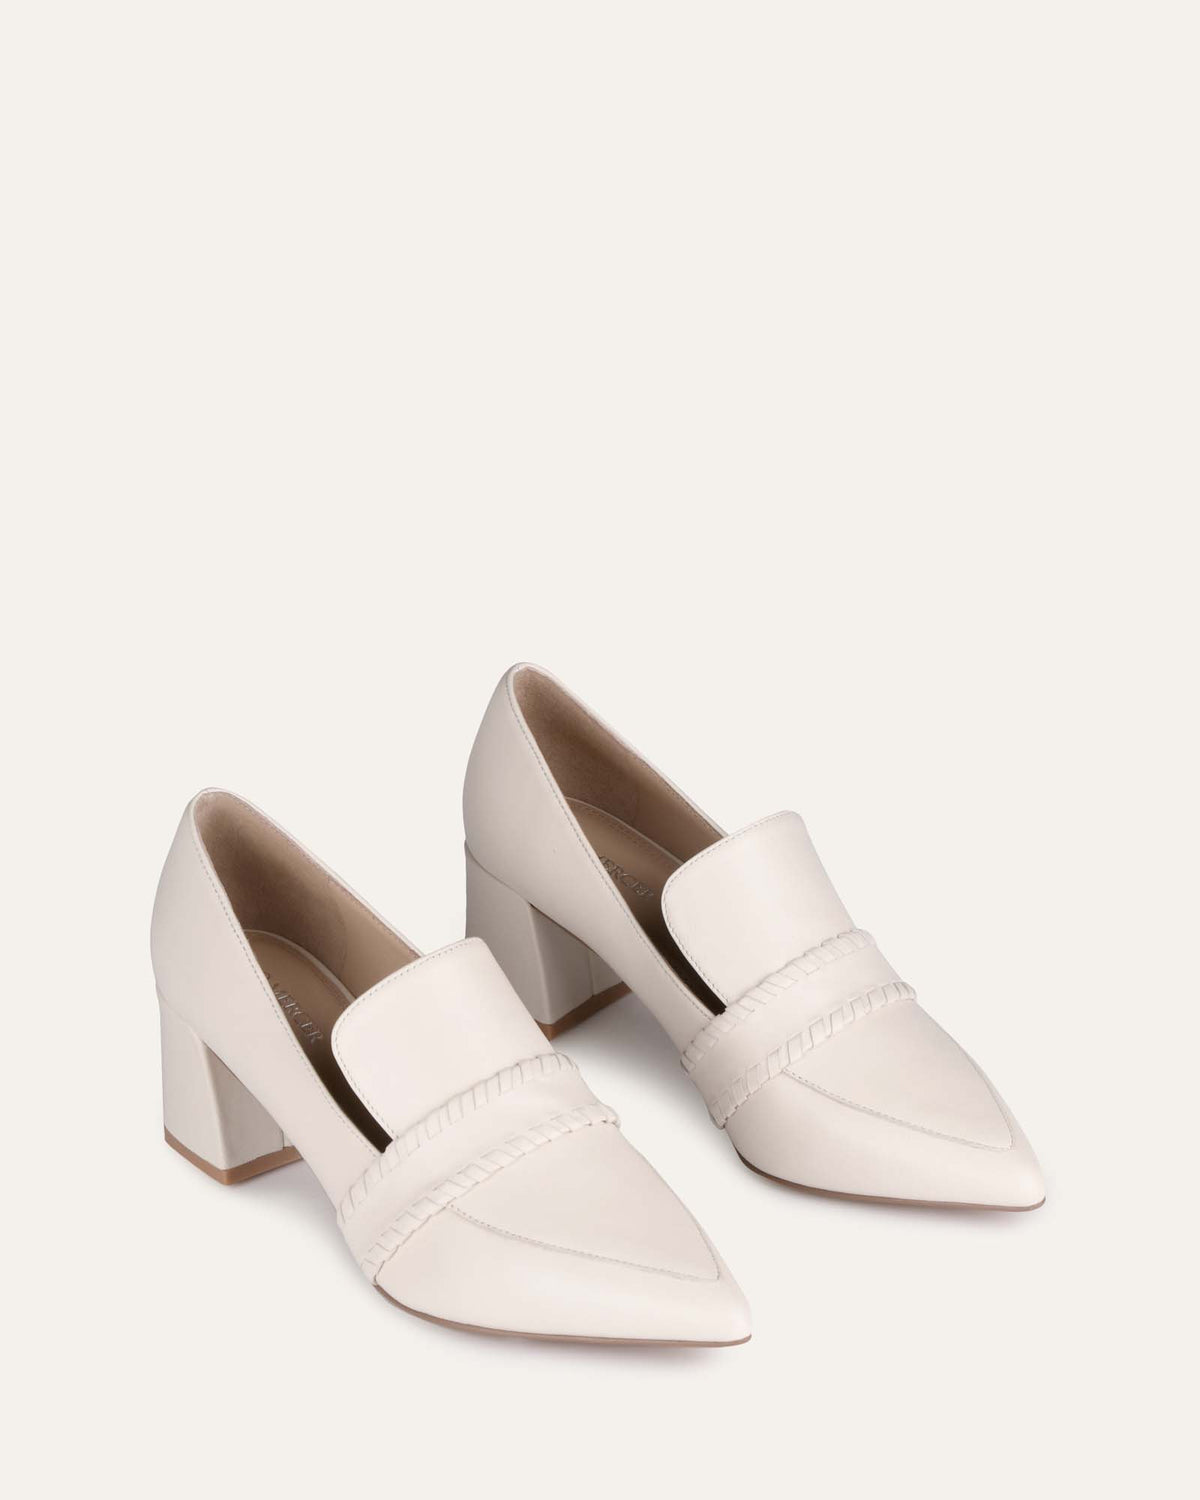 CLEO LOW HEELS OFF WHITE LEATHER